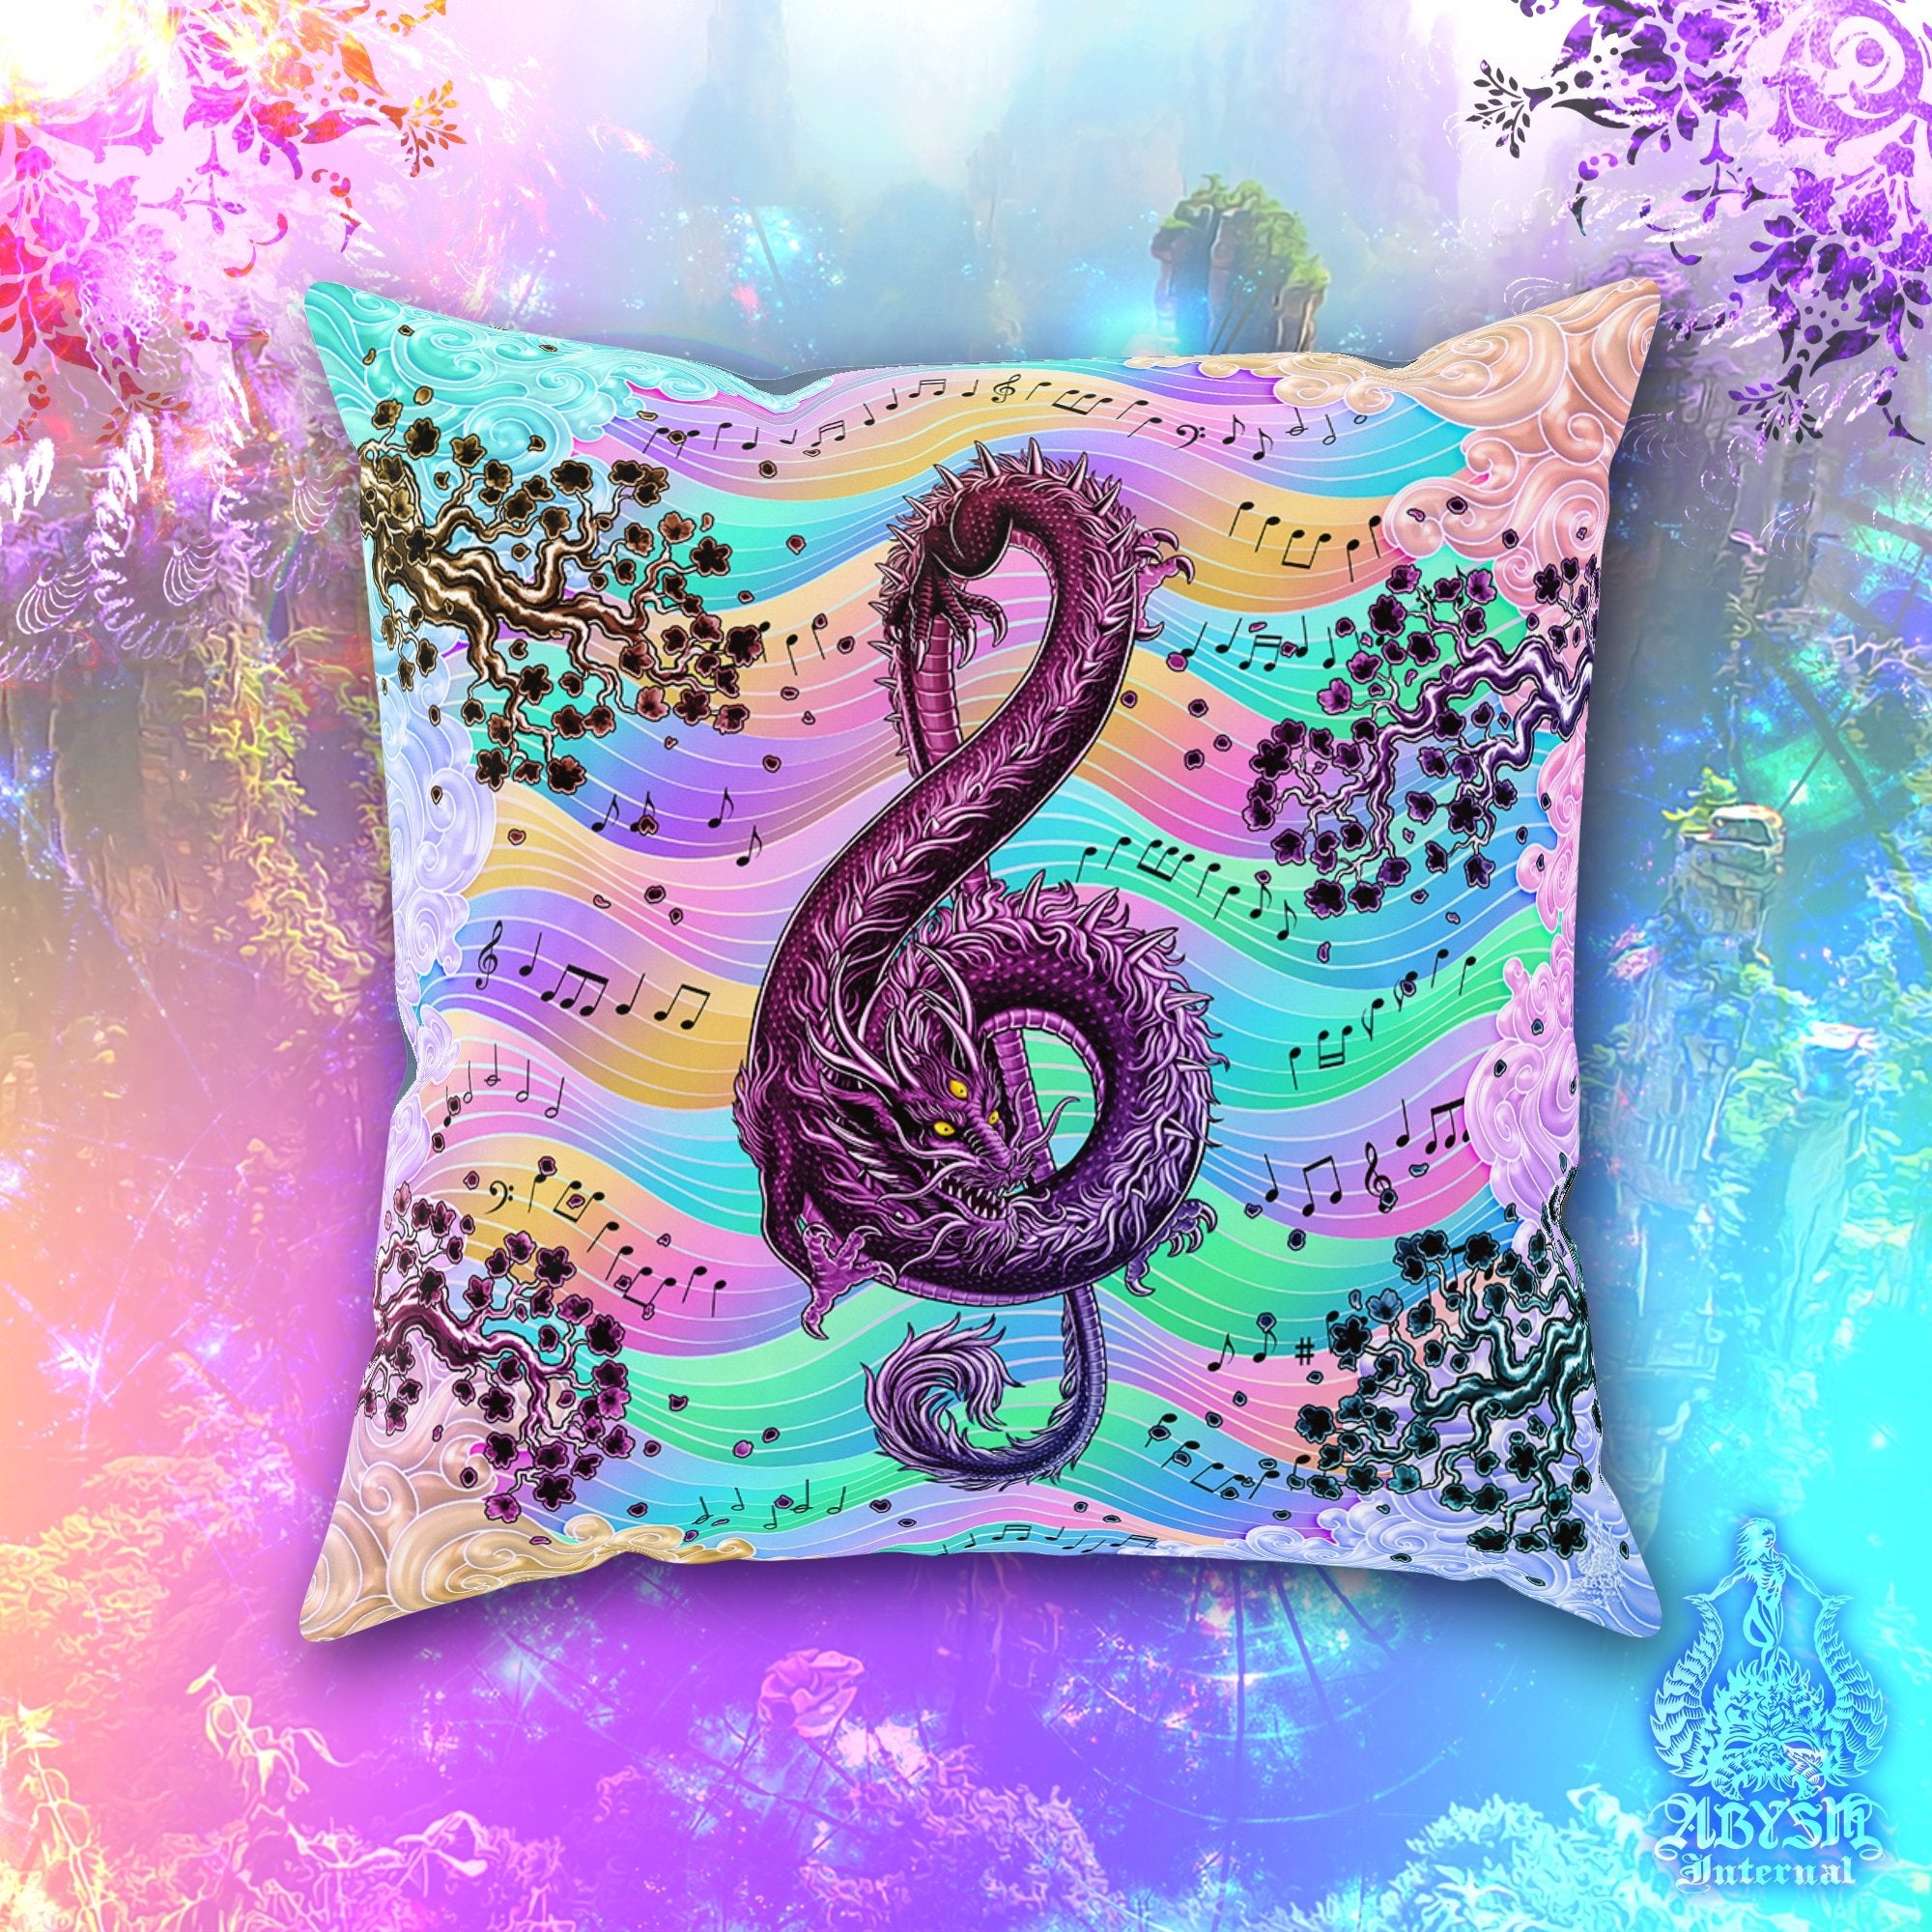 Music Throw Pillow, Decorative Accent Cushion, Psychedelic Room Decor, Black Dragon Art, Funky and Eclectic Home - Treble Clef, Pastel Punk - Abysm Internal